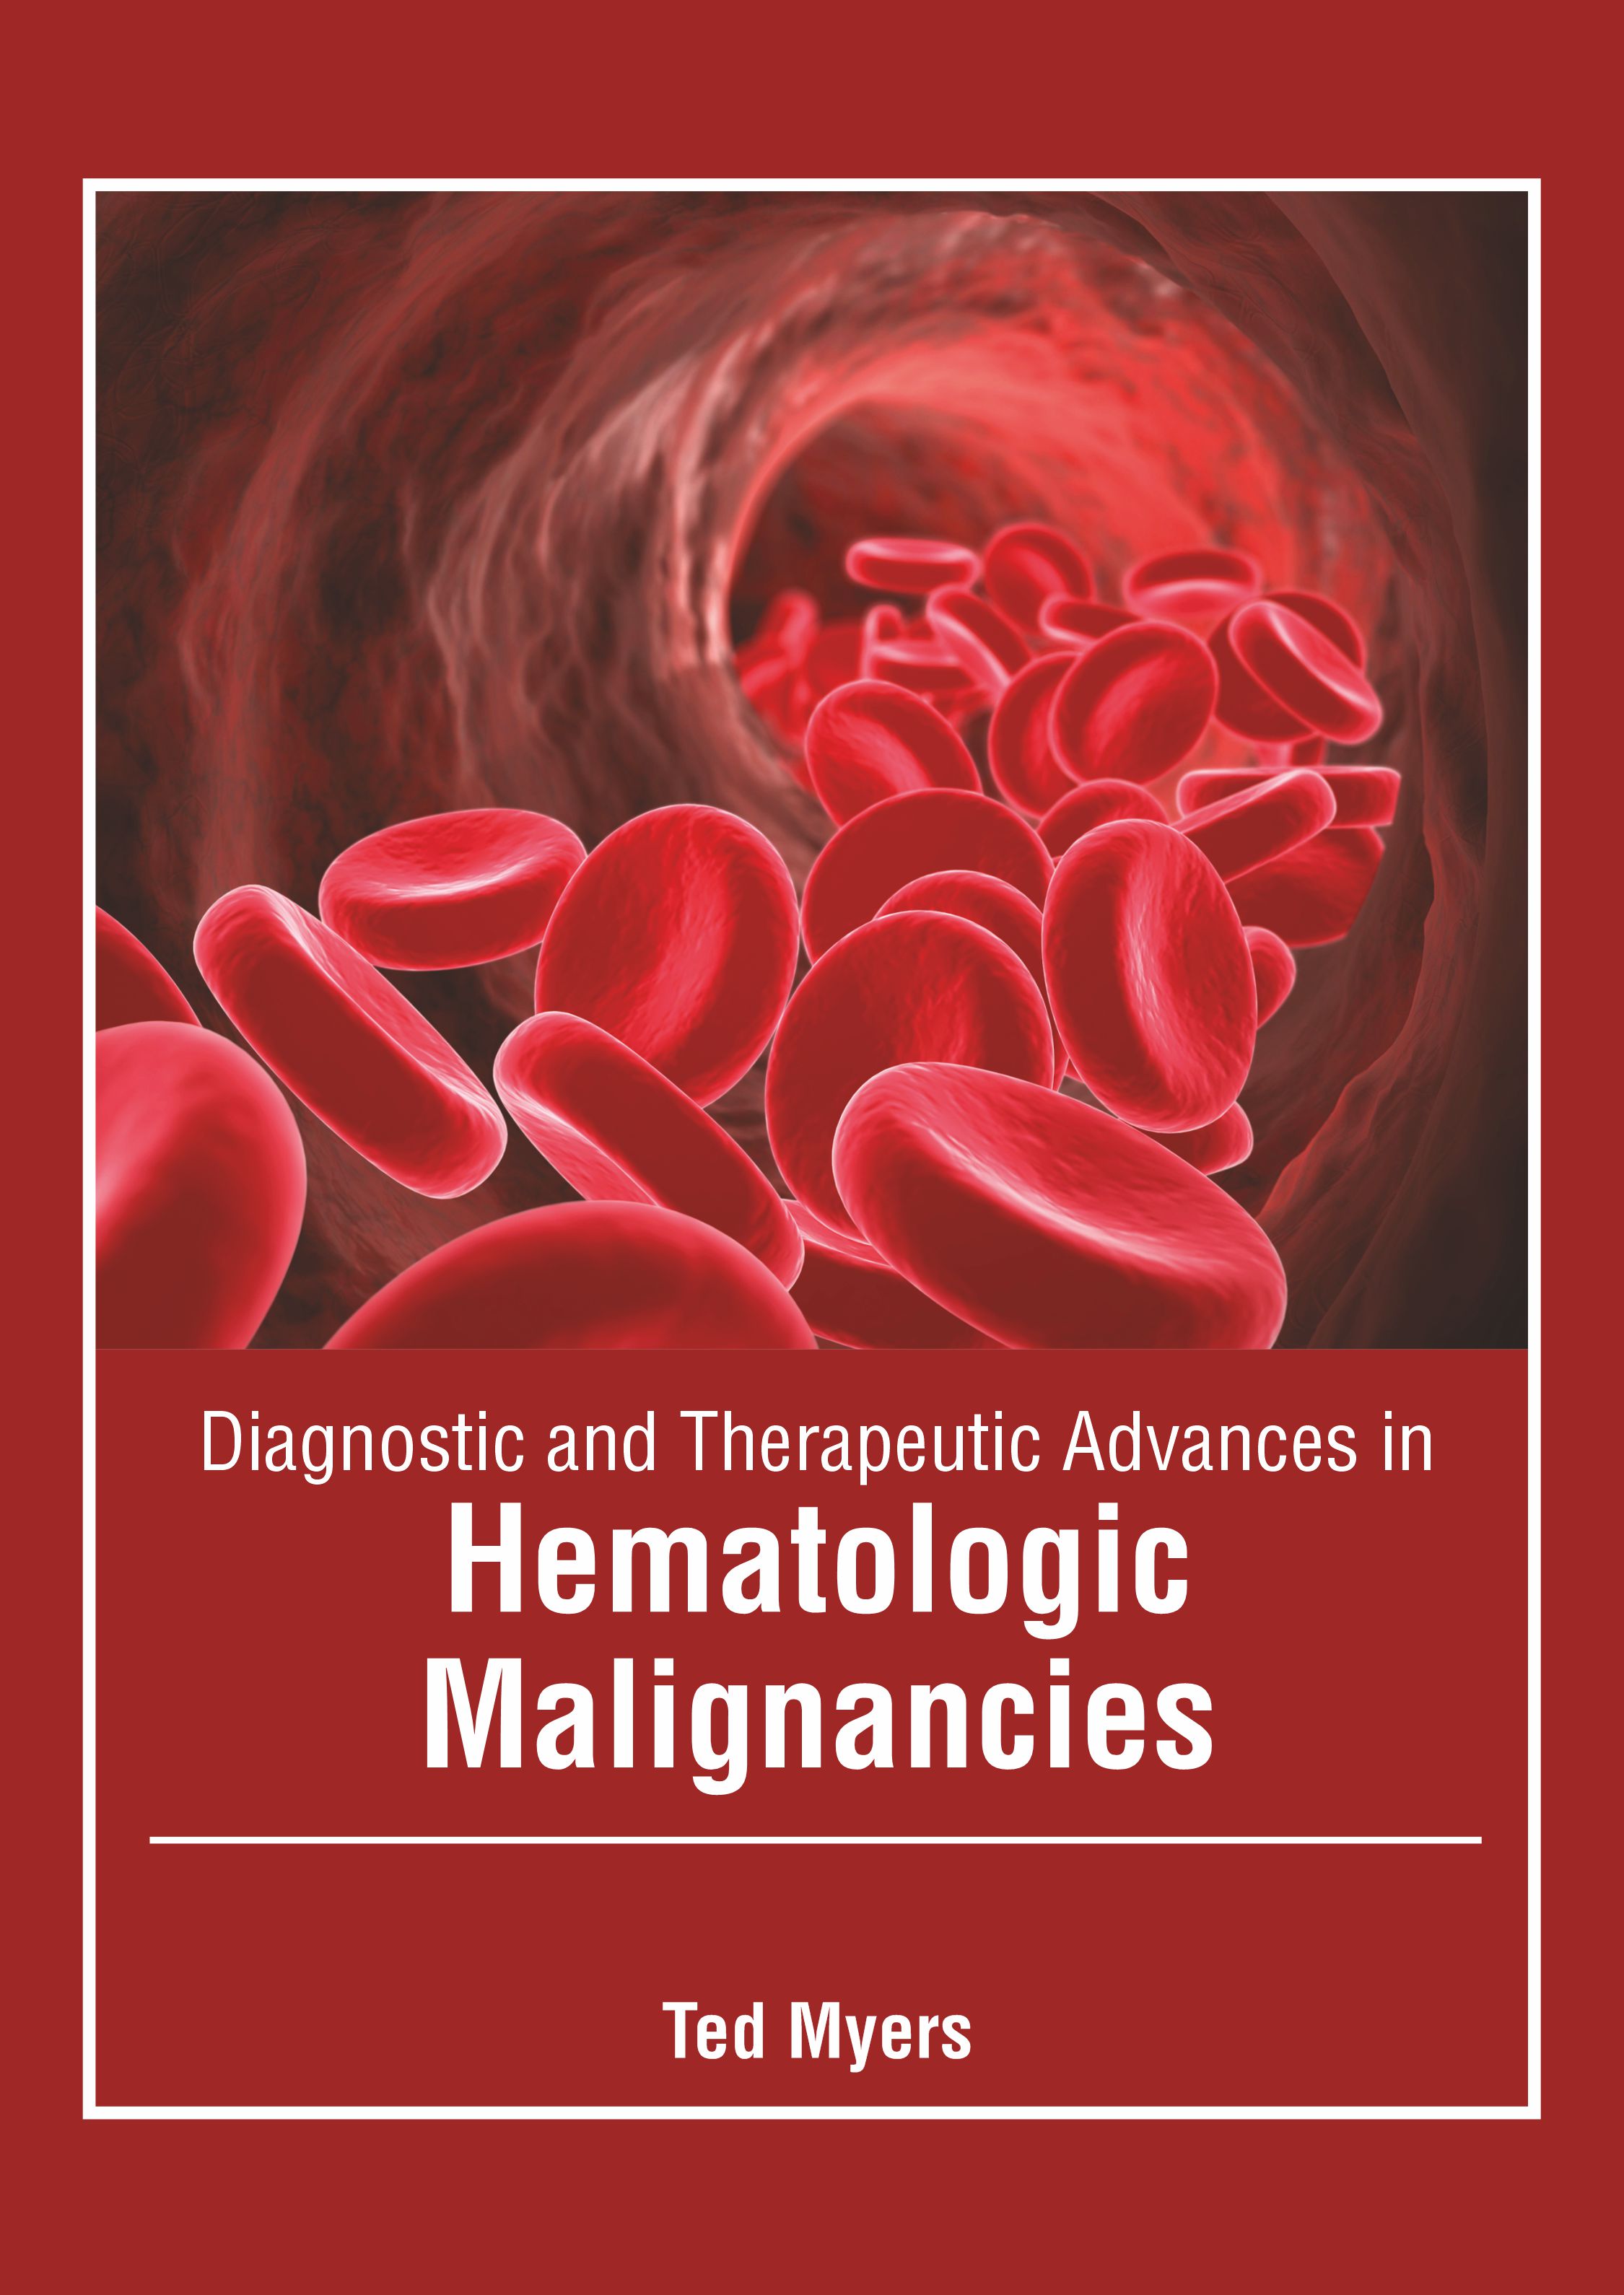 

exclusive-publishers/american-medical-publishers/diagnostic-and-therapeutic-advances-in-hematologic-malignancies-9781639273515